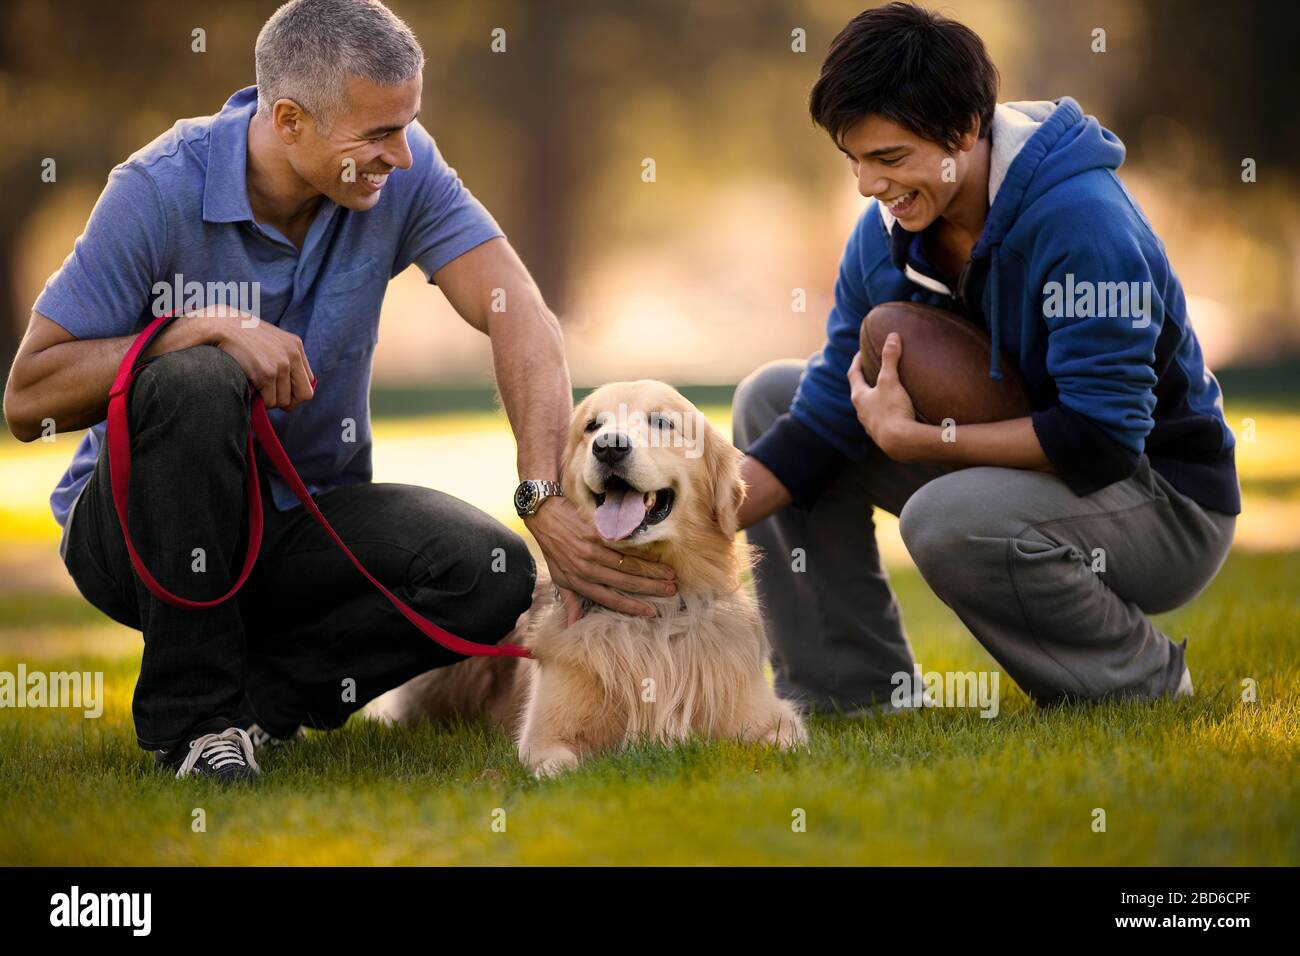 Mature man and his son having fun petting their dog together while crouching in a park. Stock Photo